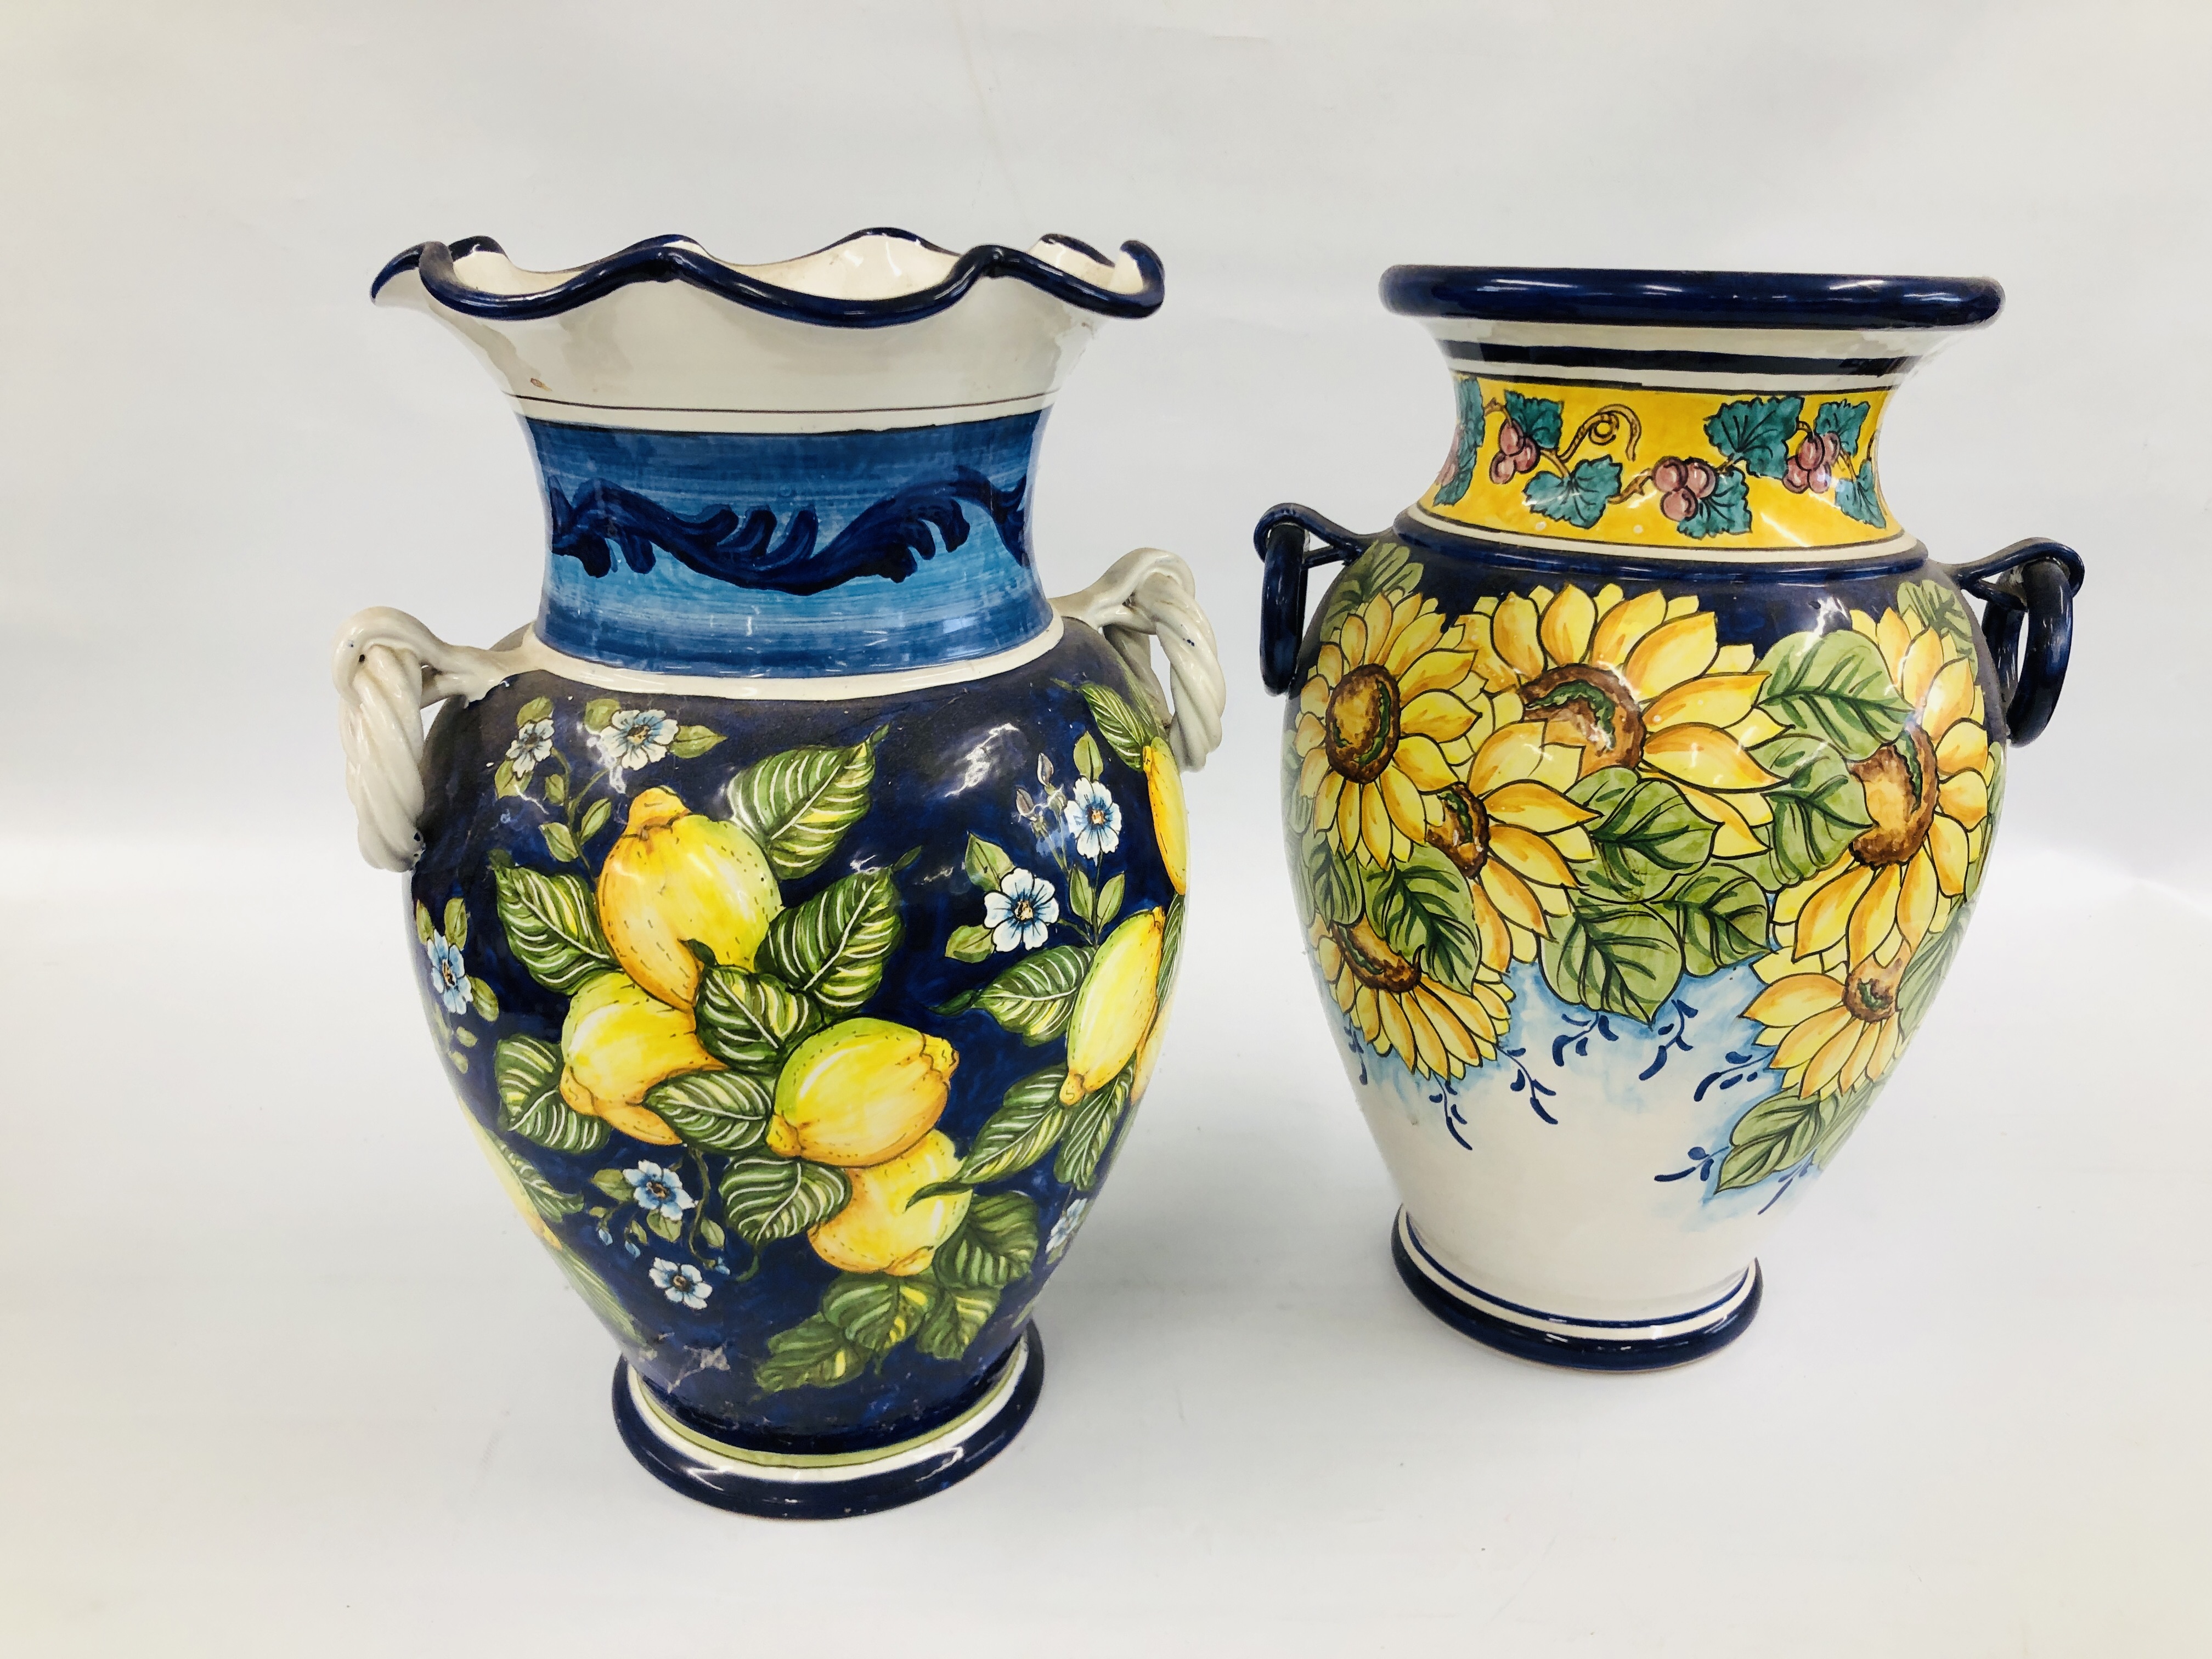 TWO LARGE CONTINENTAL GLAZED VASES ONE DECORATED WITH SUNFLOWERS, H 55.5CM THE OTHER LEMONS, H 56CM.